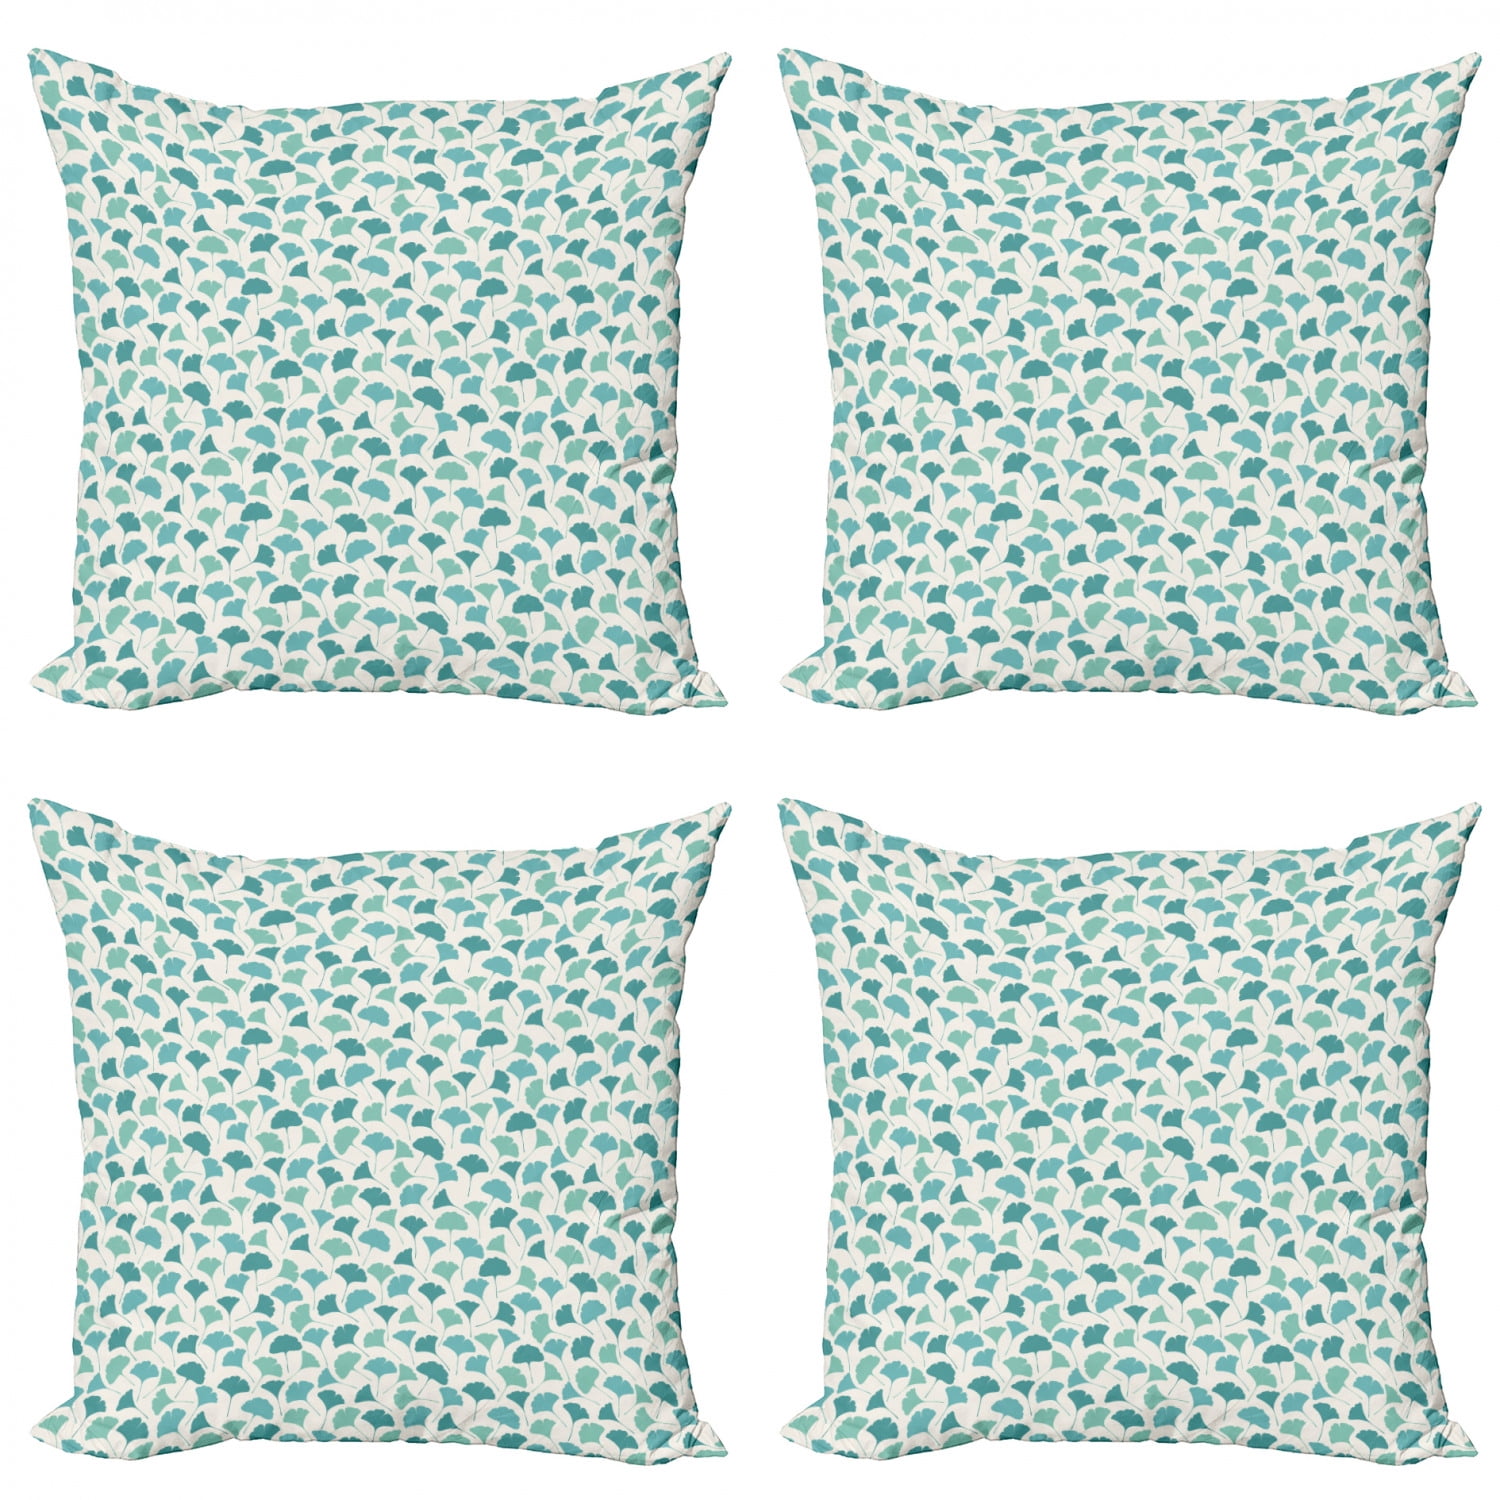 16x16 Turquoise Teal Pink Outdoor Pillow Cover in Floral Print Gold and Cream Sun n Shade  Patio or Deck Pillow